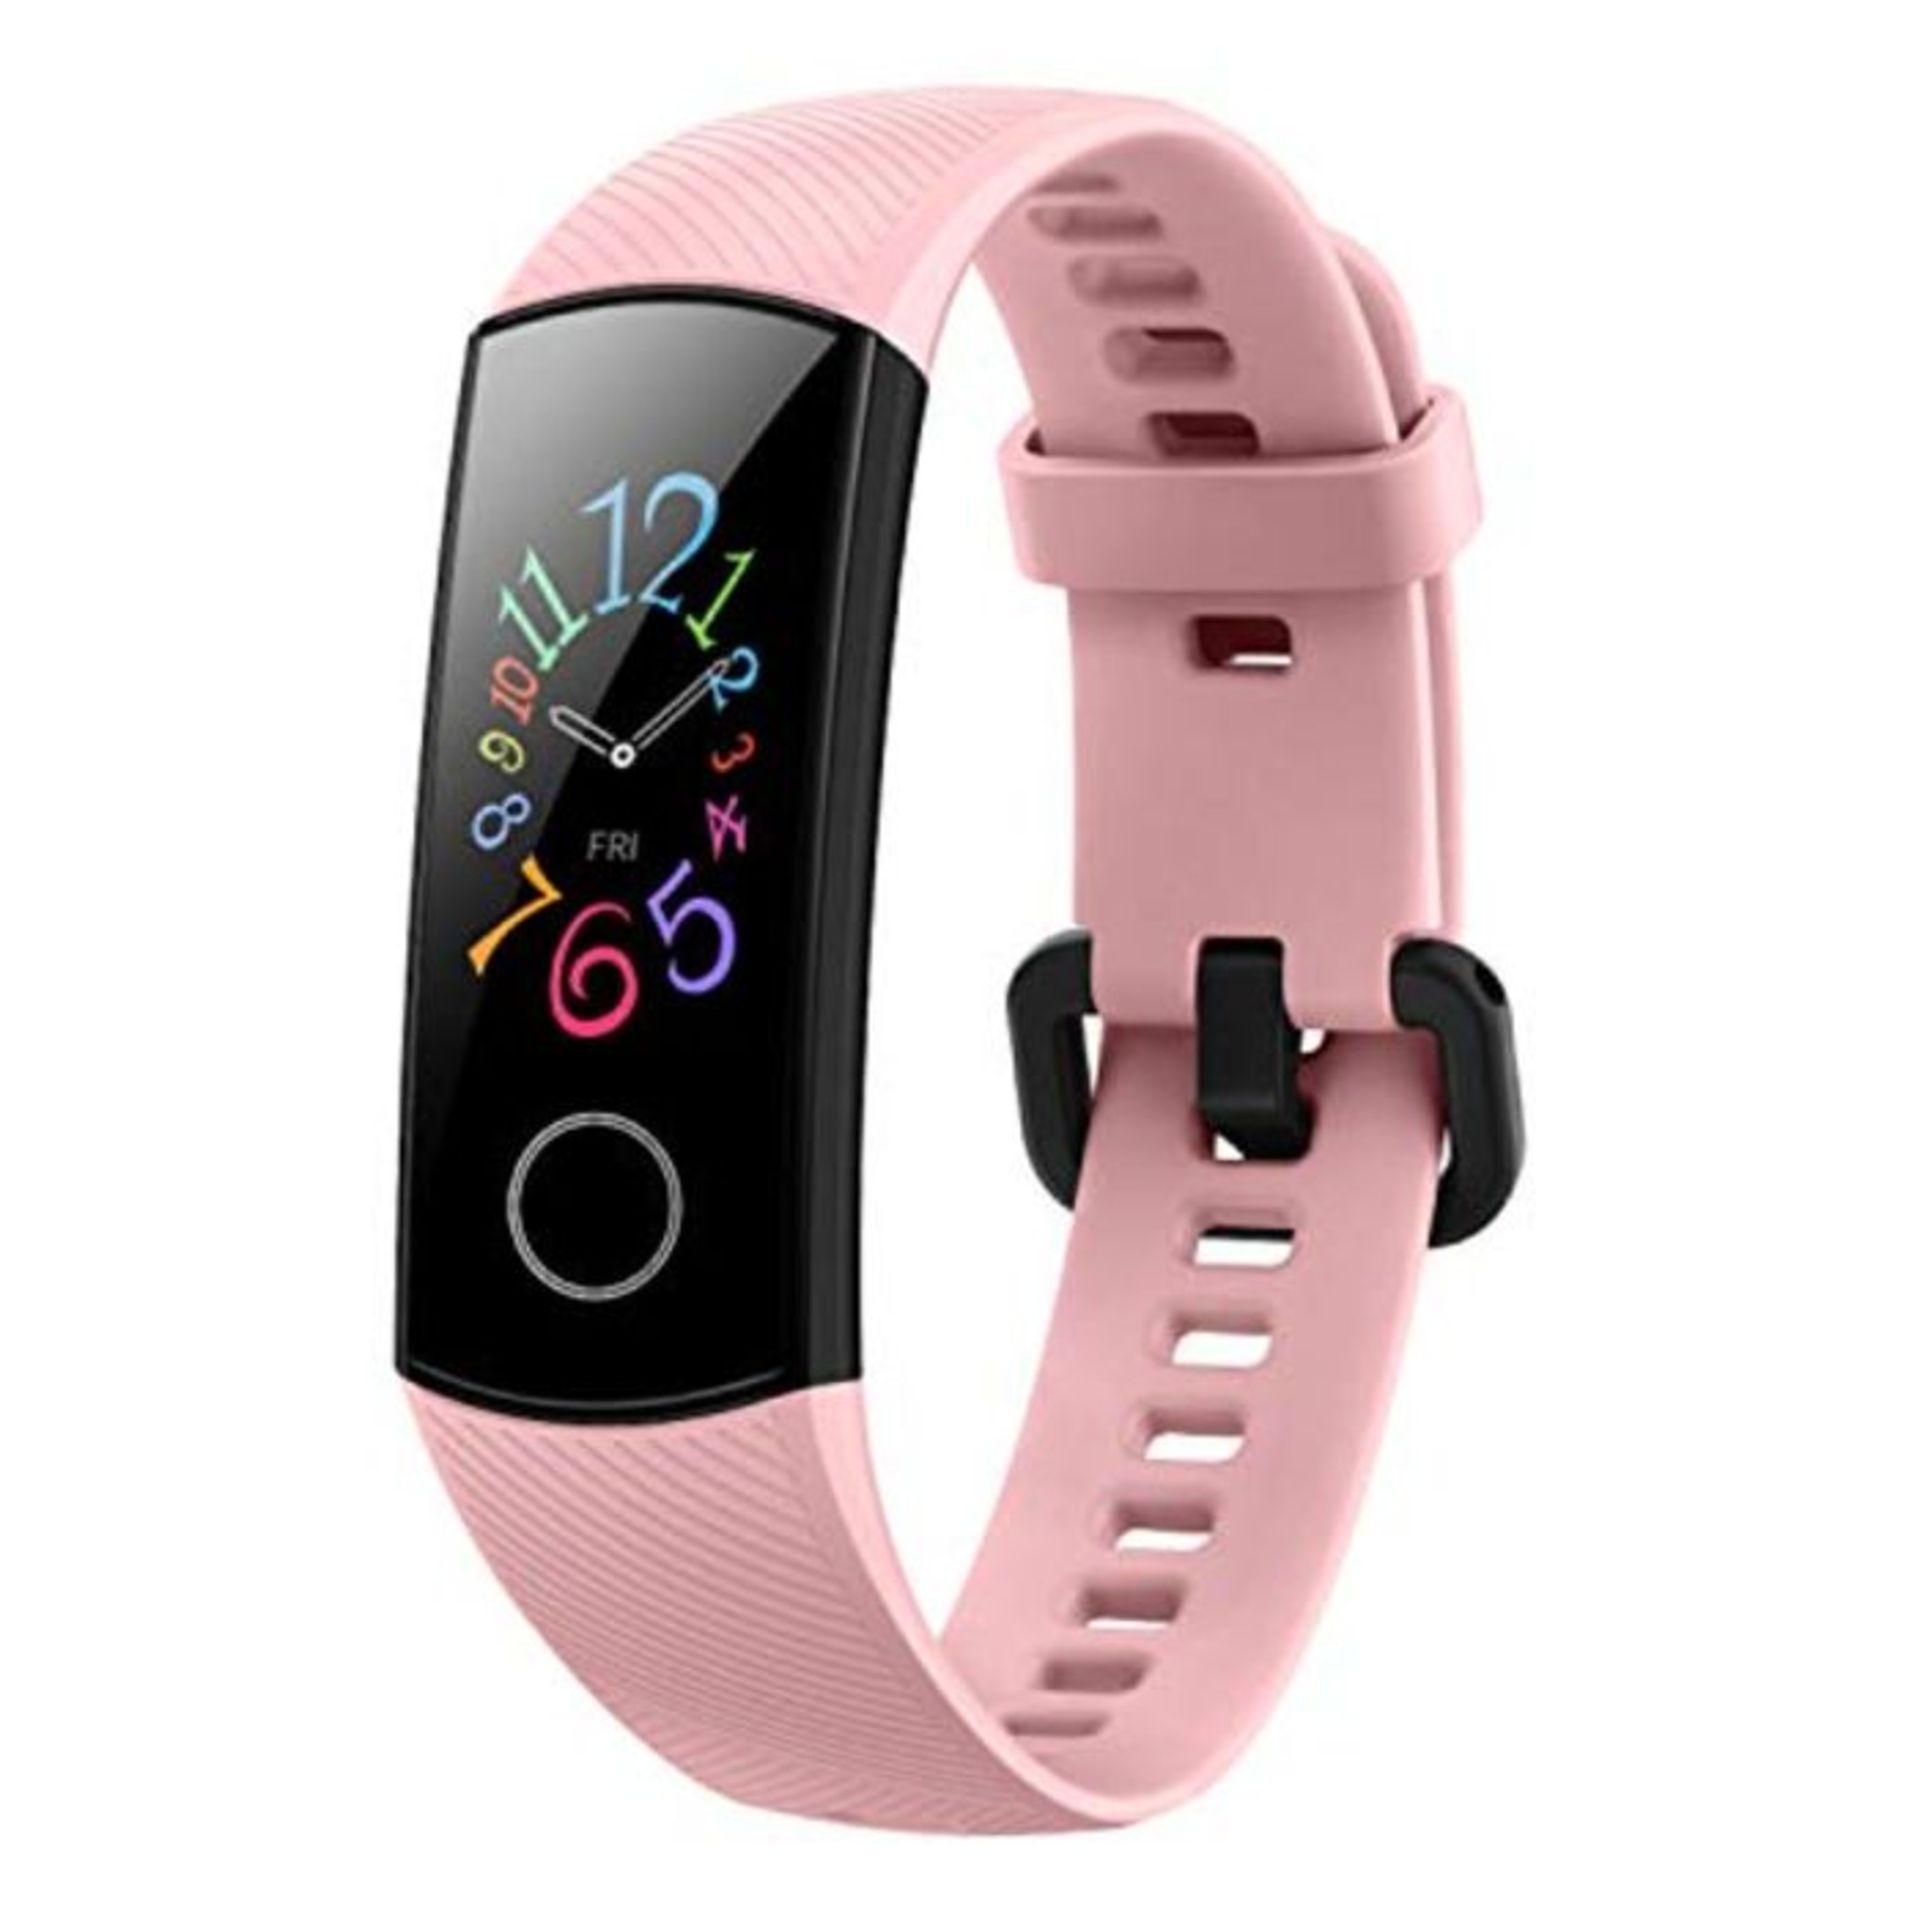 HONOR Band 5 Smart Wristband/Fitness Tracker with Heartrate Monitor, Blood Oxygen Sens